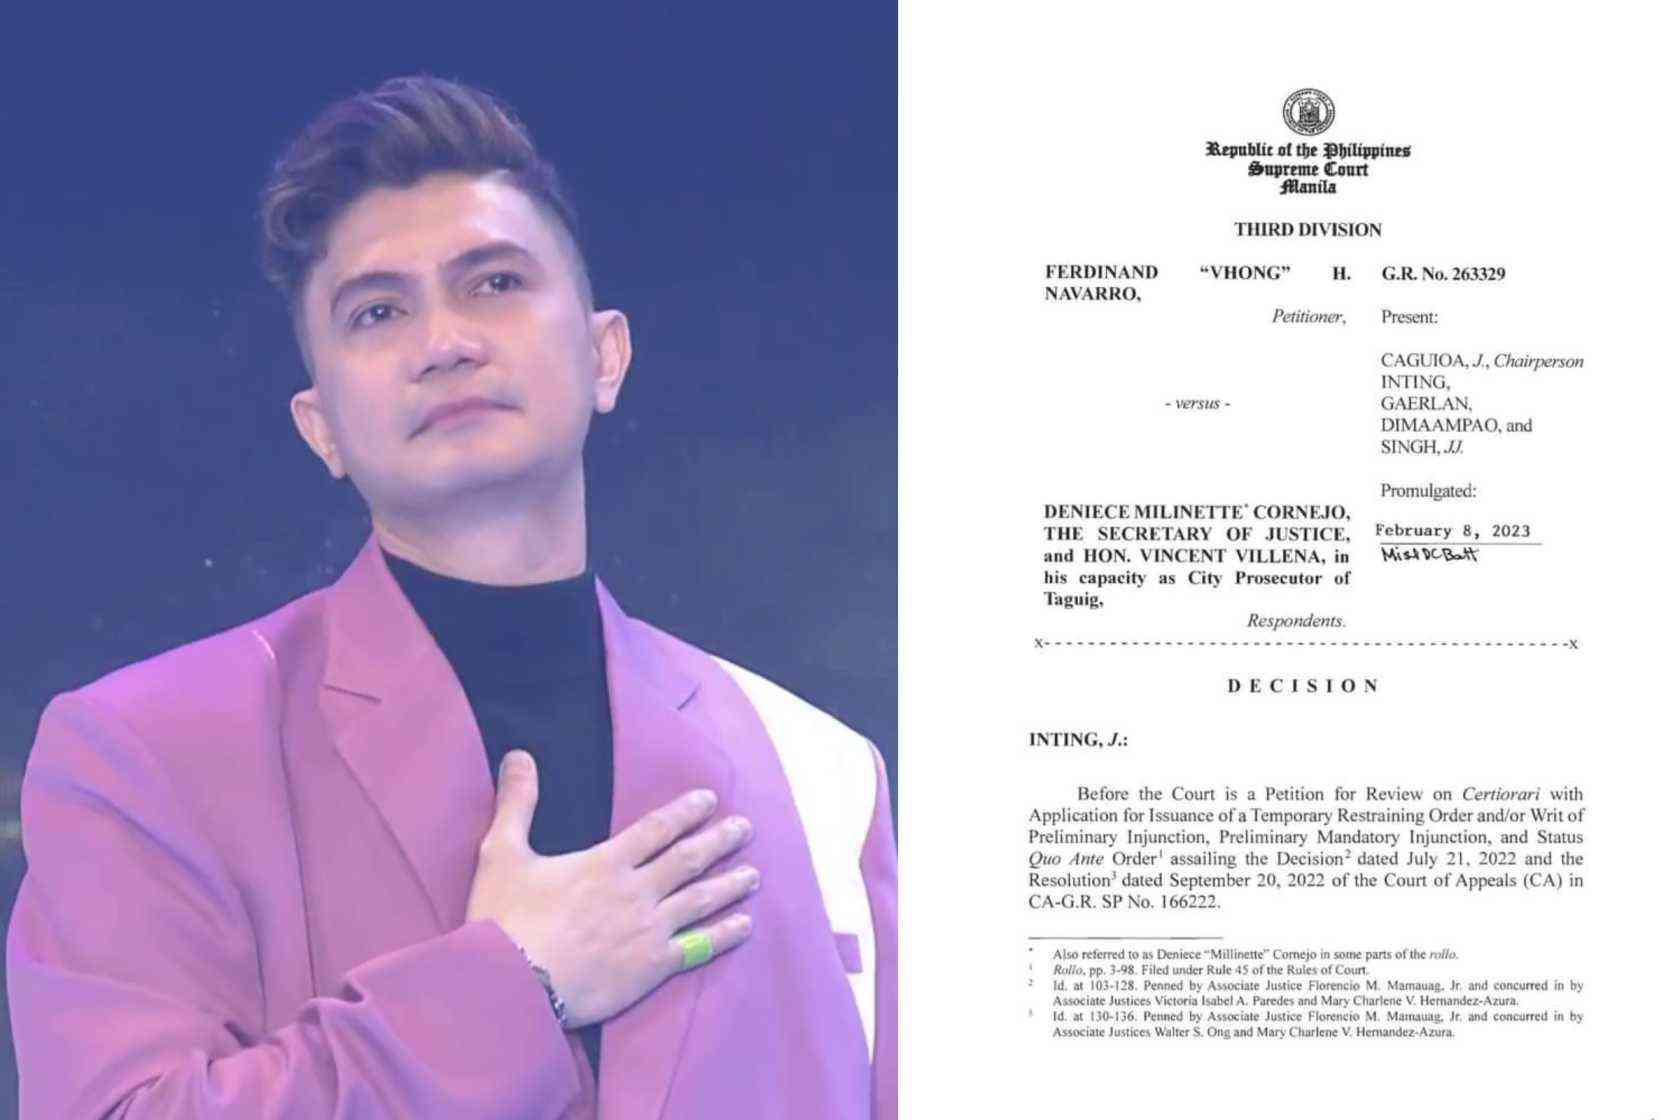 SC division orders dismissal of rape, acts of lasciviousness charges vs Vhong Navarro